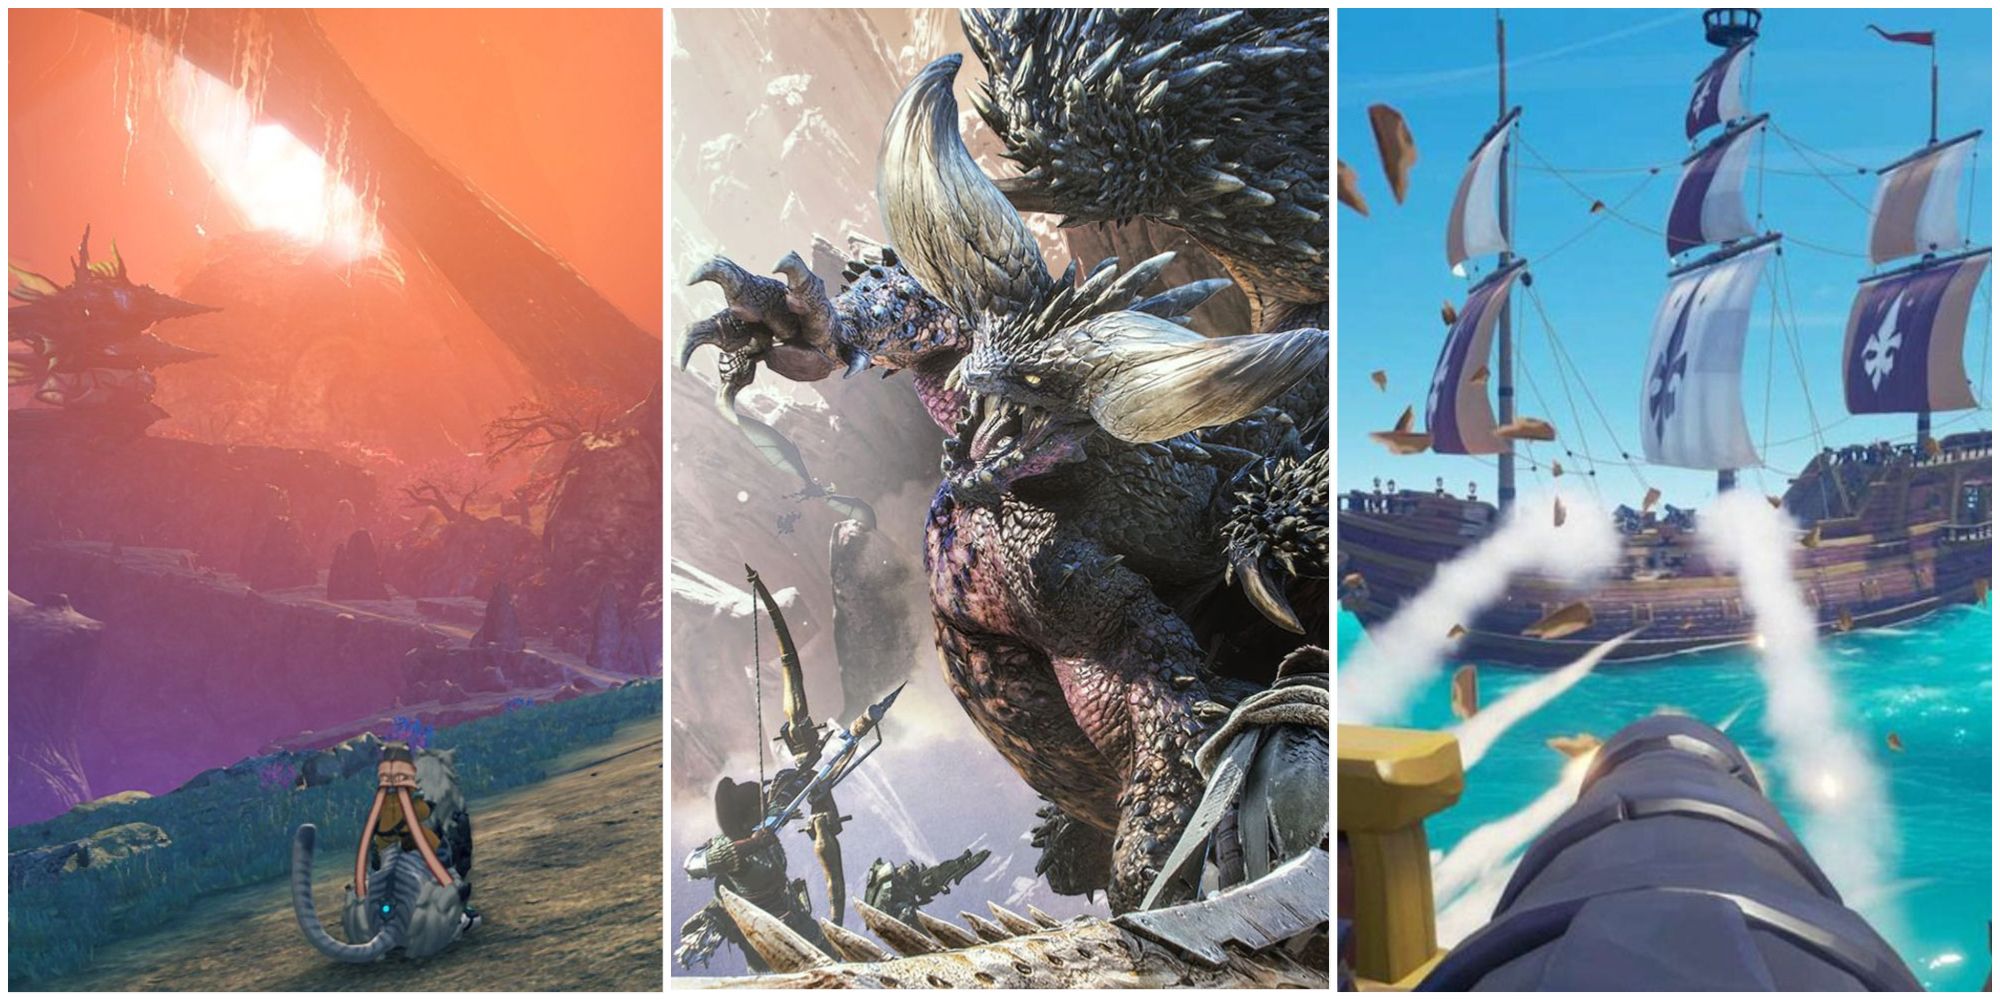 Split image of Xenoblade, Monster Hunter, and Sea of Thieves